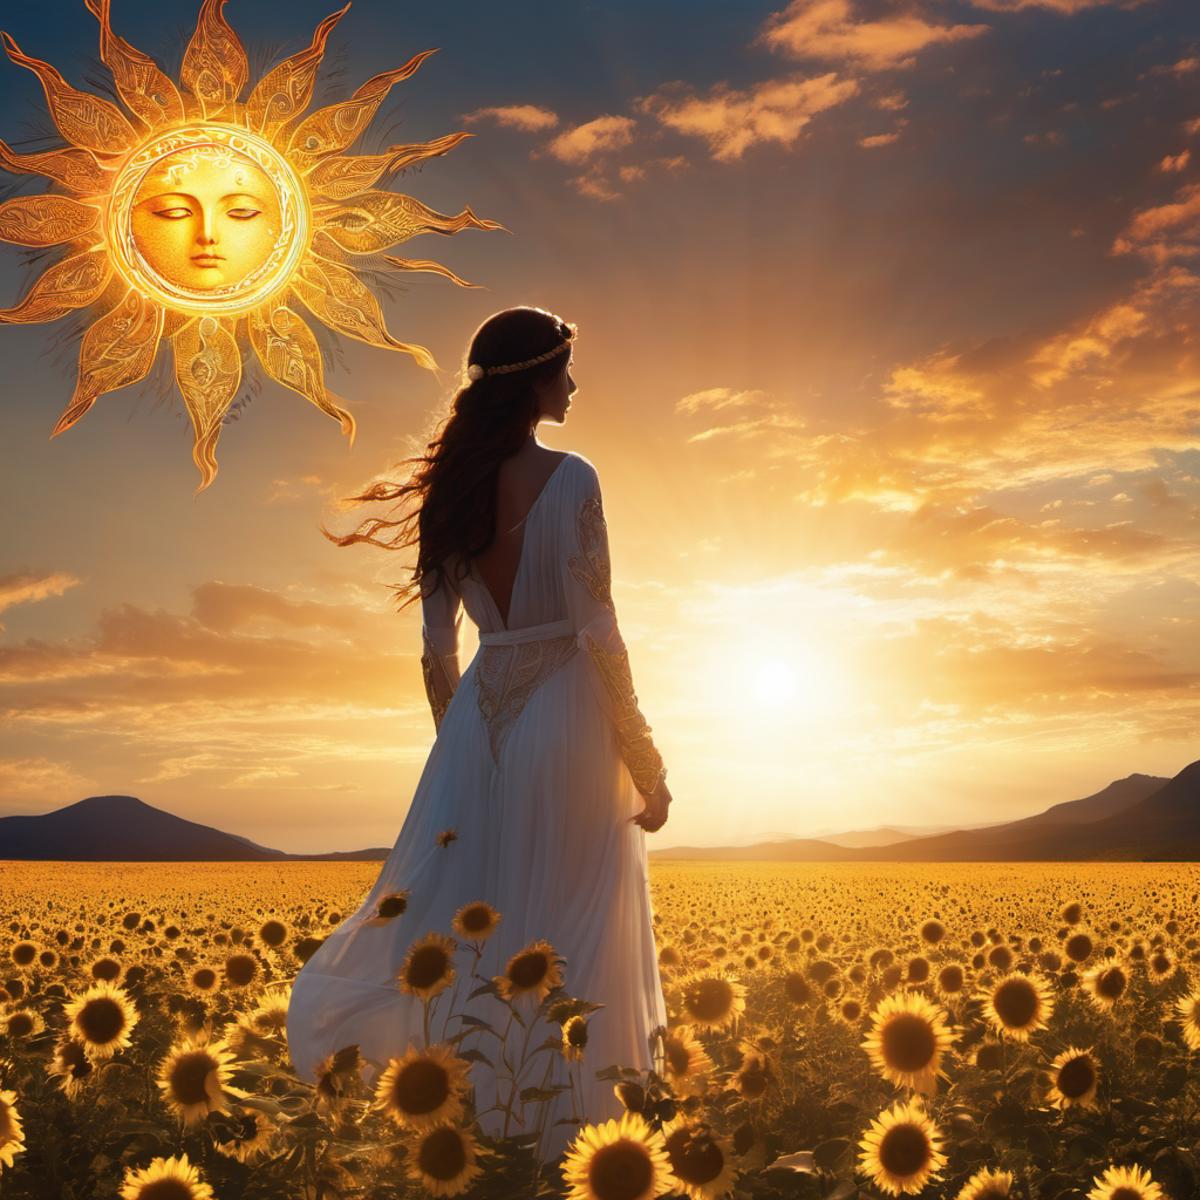 A woman in a white dress standing in a sunflower field with the sun in the background.